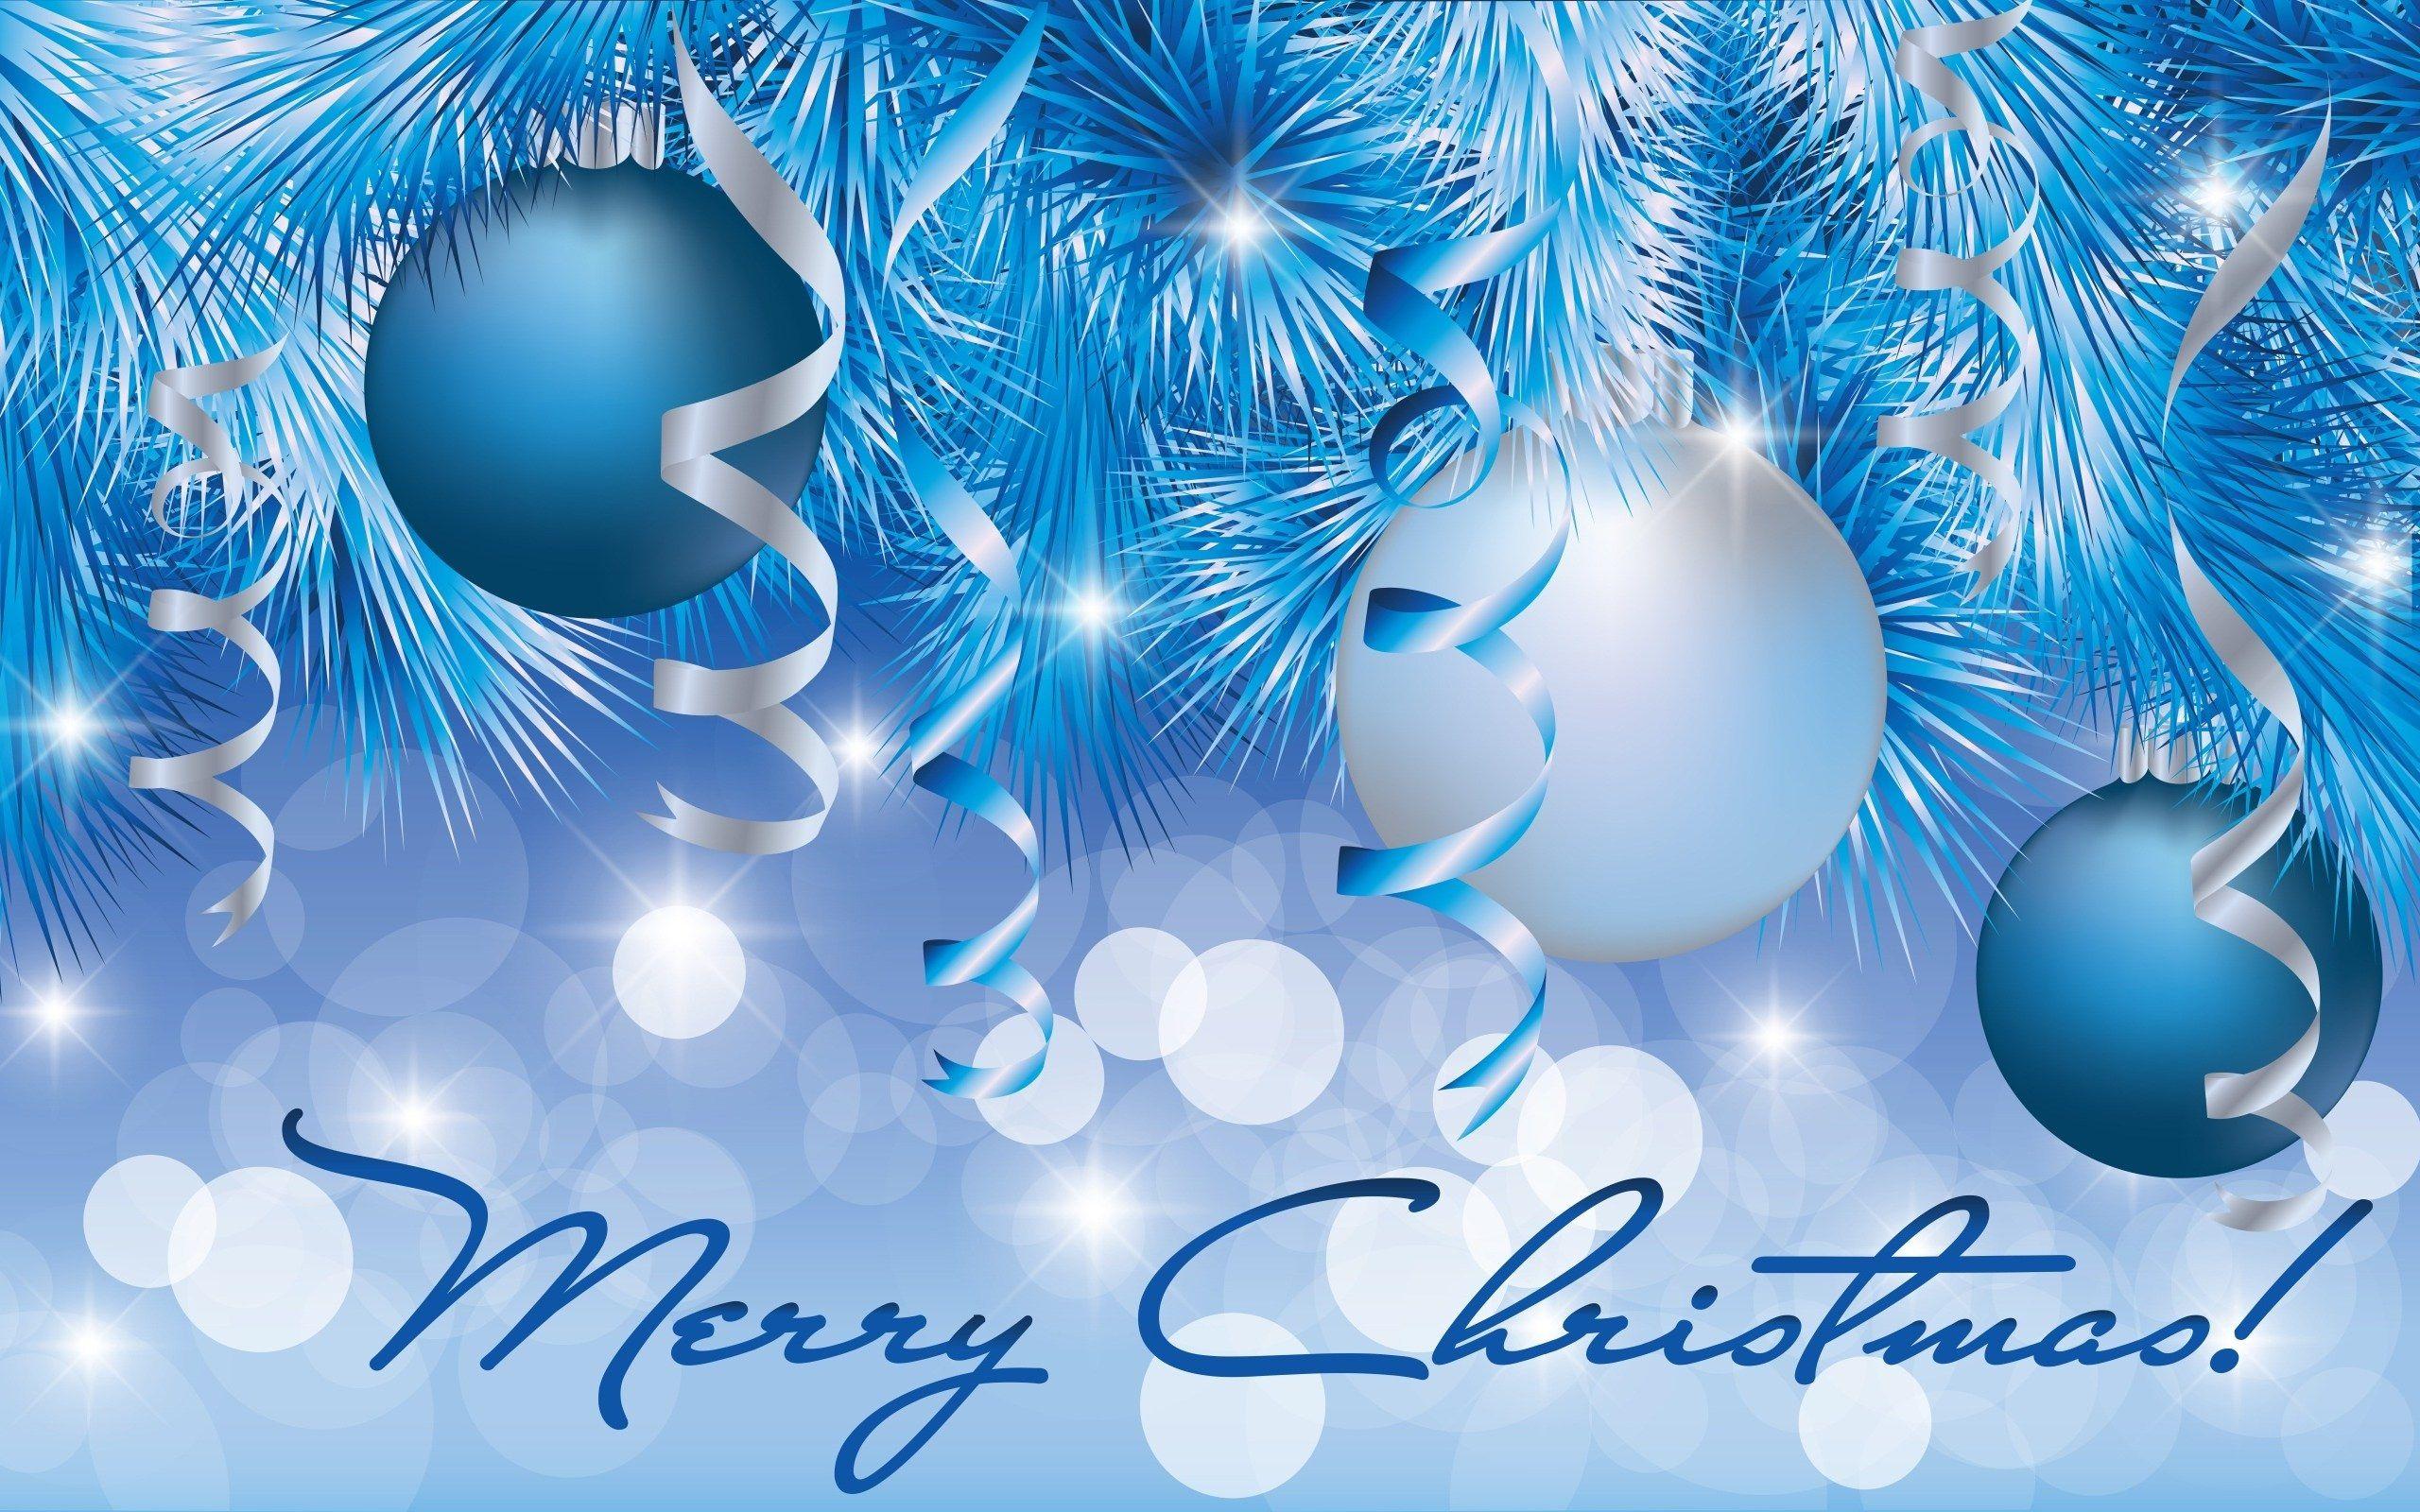 Blue And Silver Christmas wallpaper. Merry christmas wallpaper, Silver christmas wallpaper, Christmas facebook cover